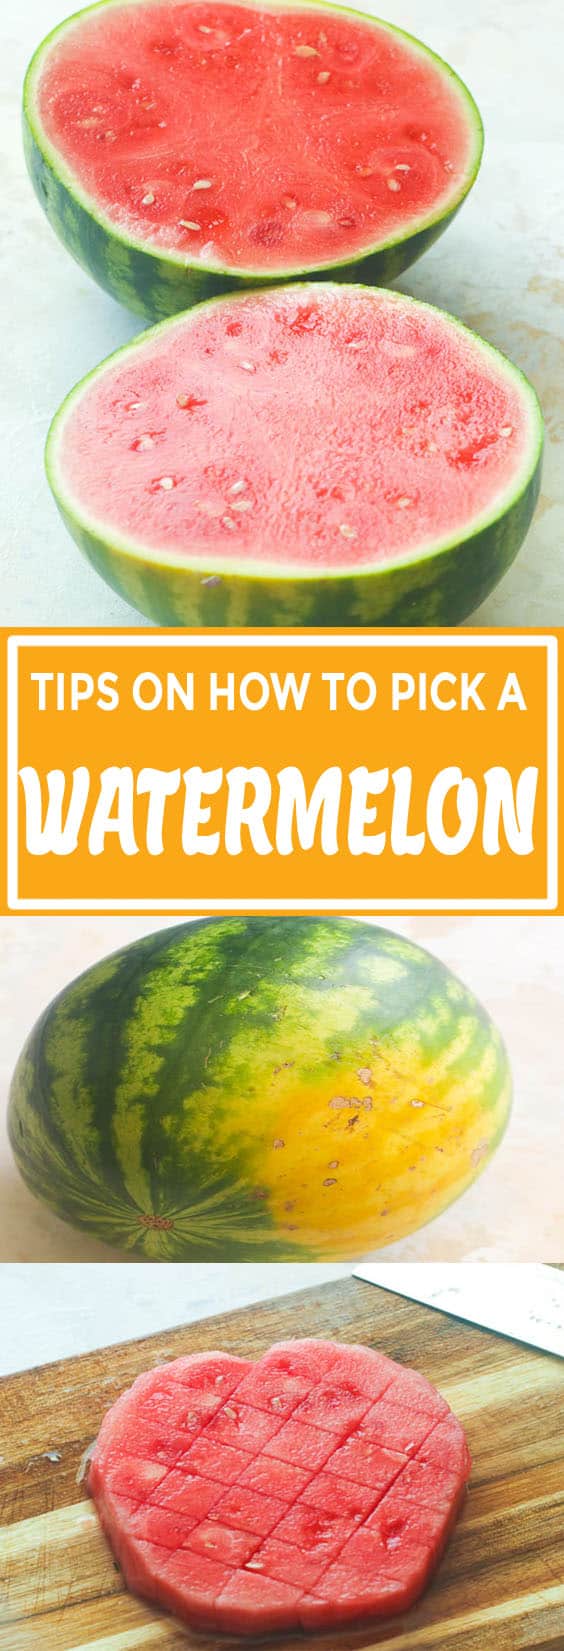 How to Pick a Watermelon